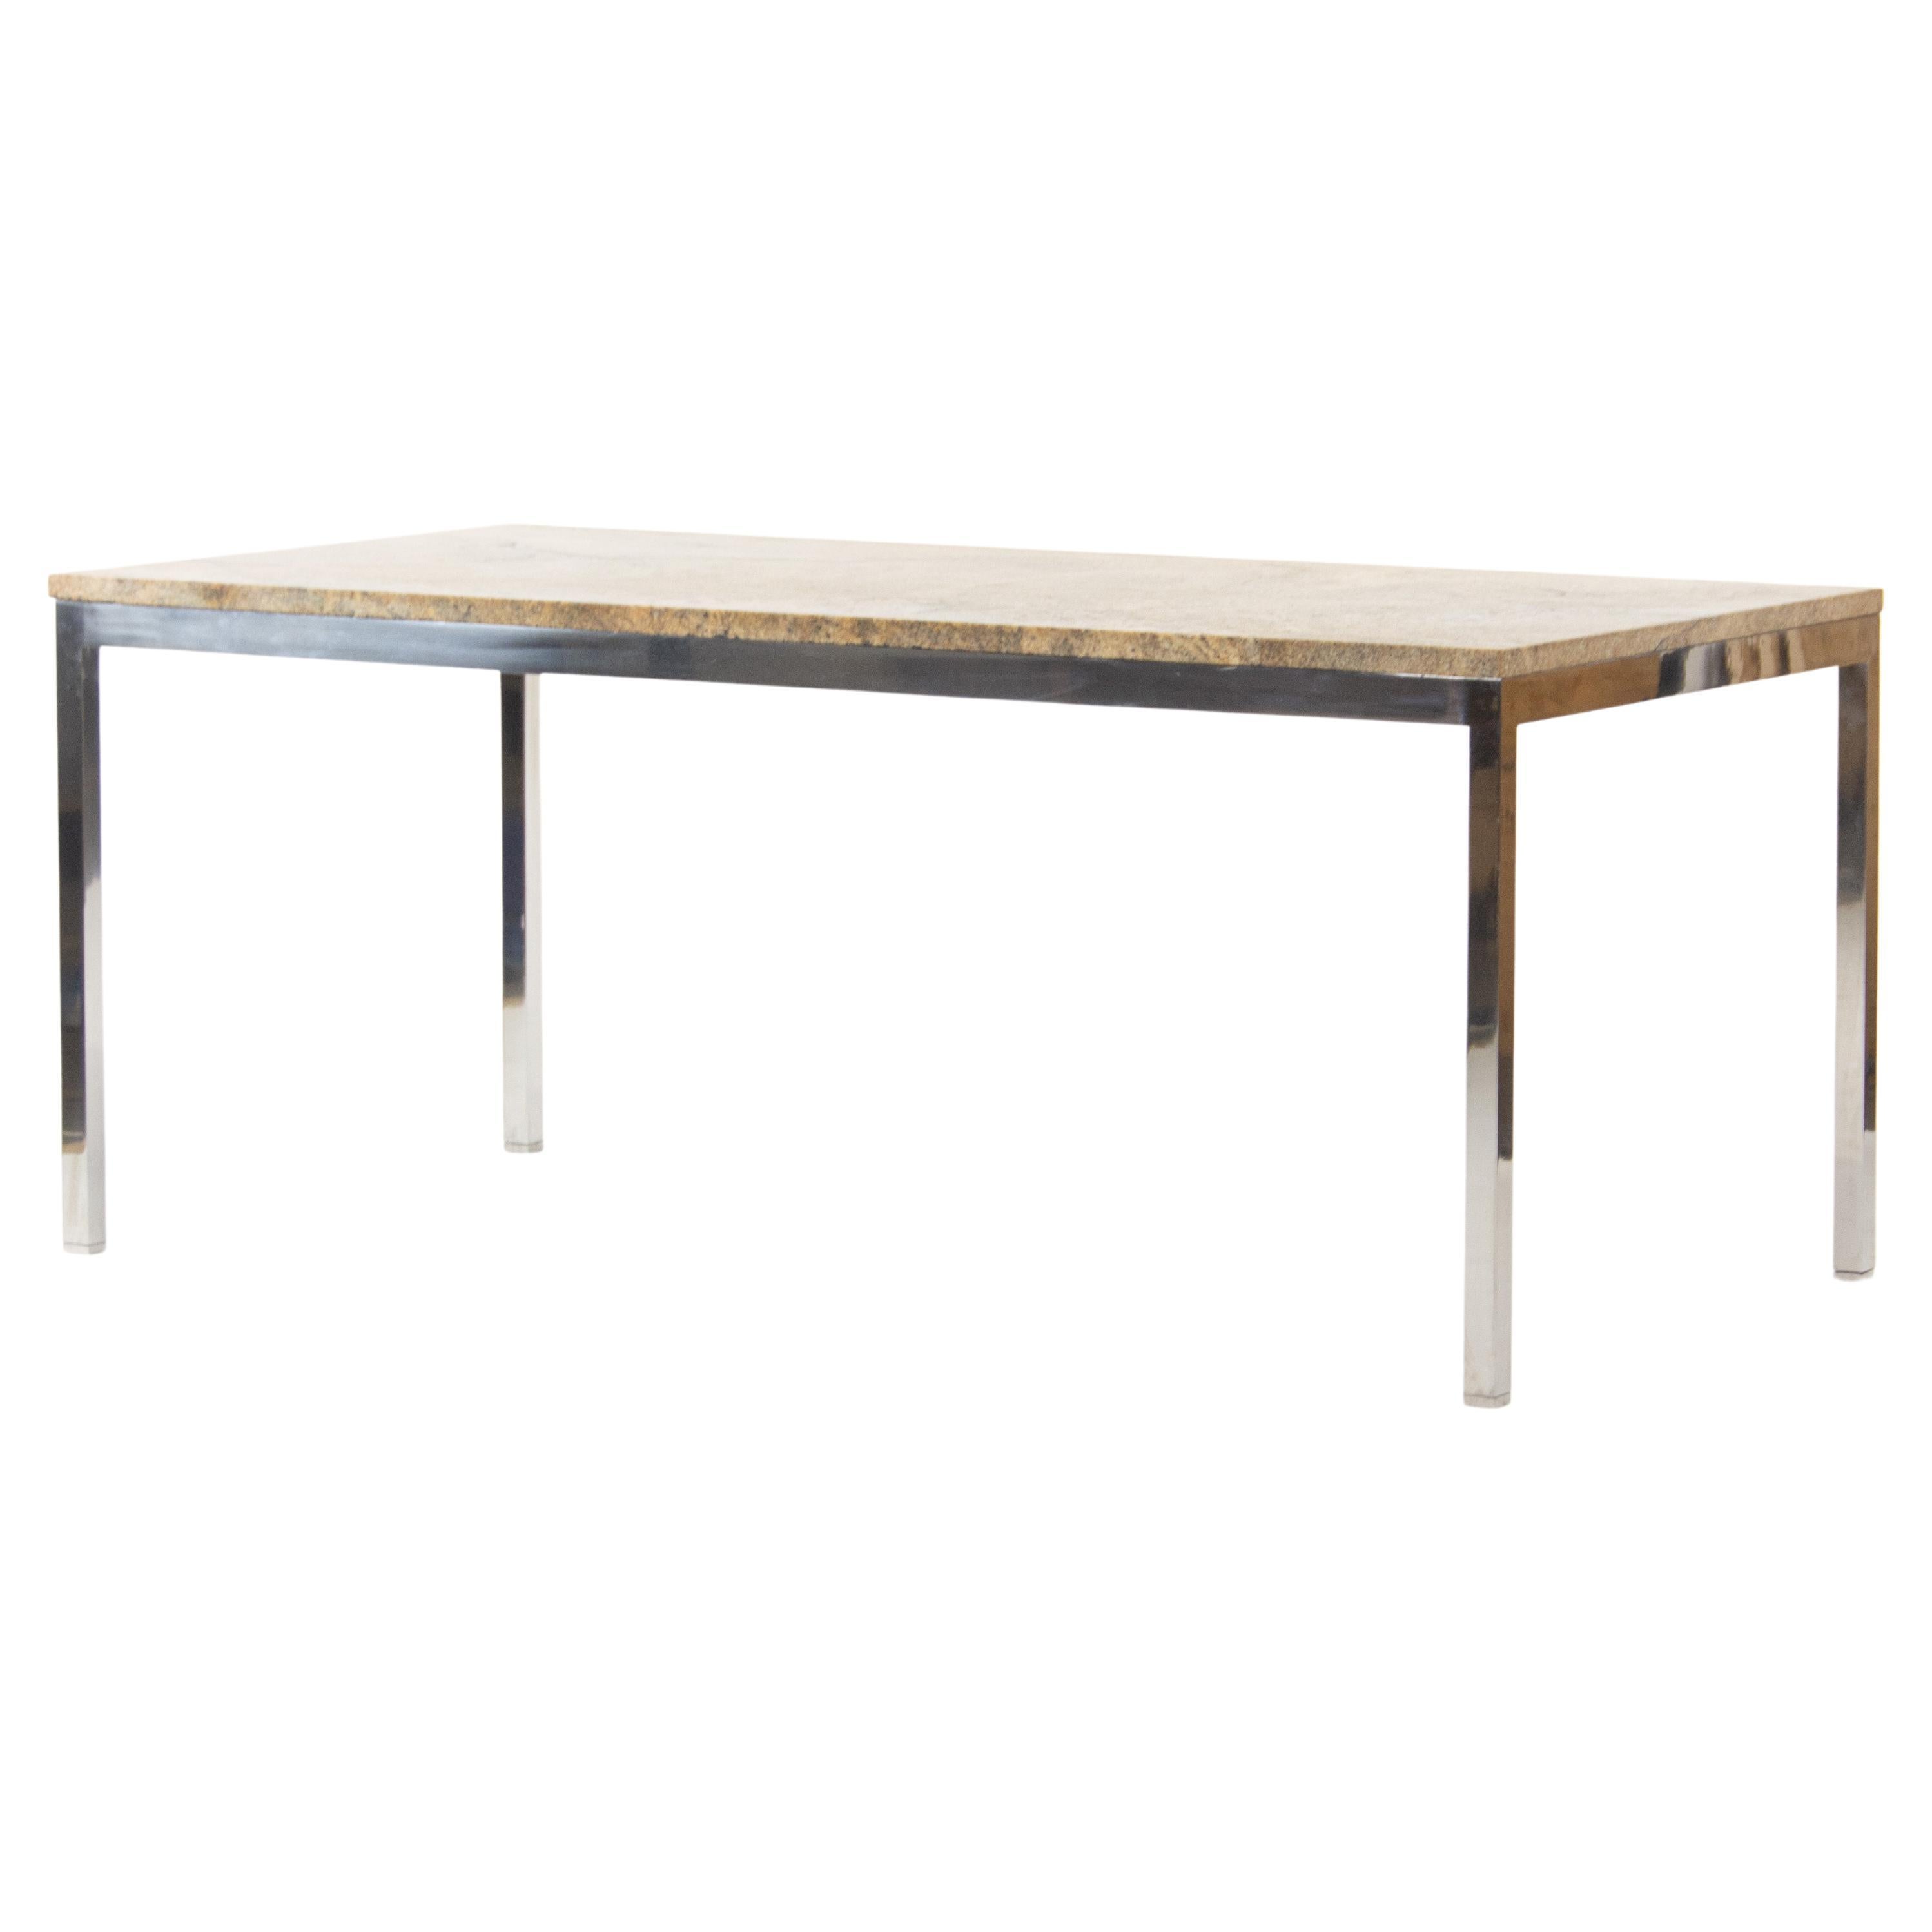 Marble 6x3 Meeting Dining Conference Table Tan w/ Steel Base from SOM Project For Sale